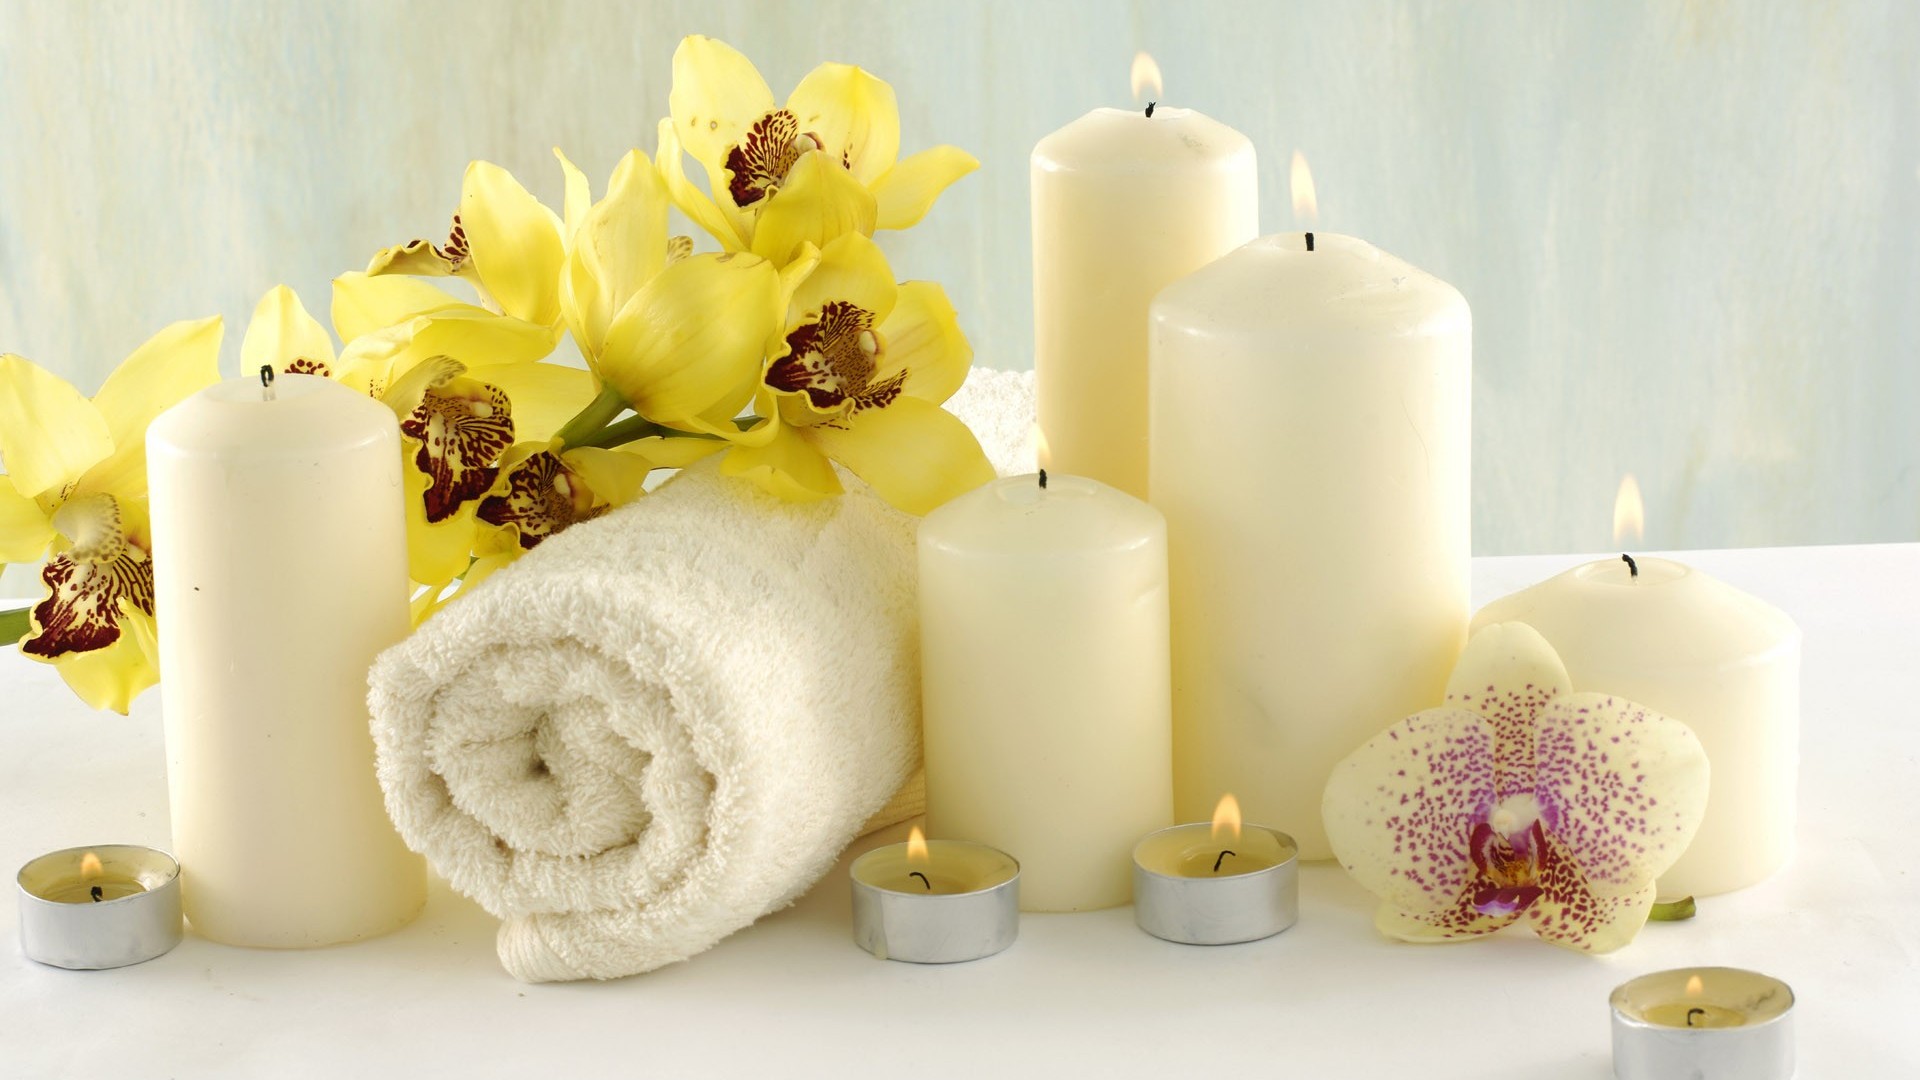 spa, orchid, man made, candle, flower, still life, towel